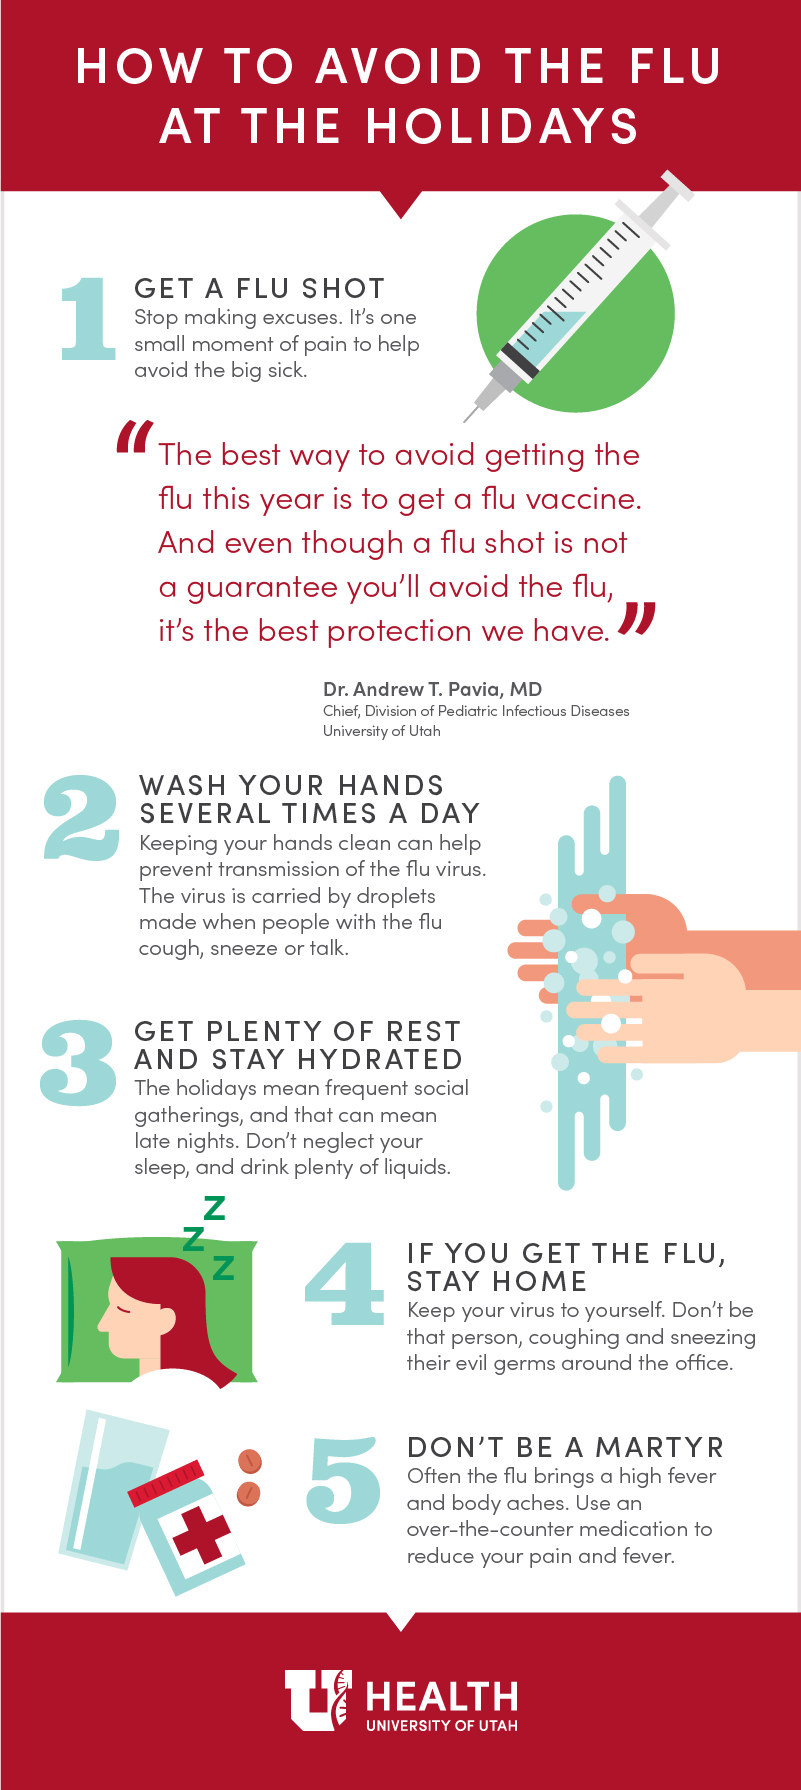 How to avoid the flu during the holidays